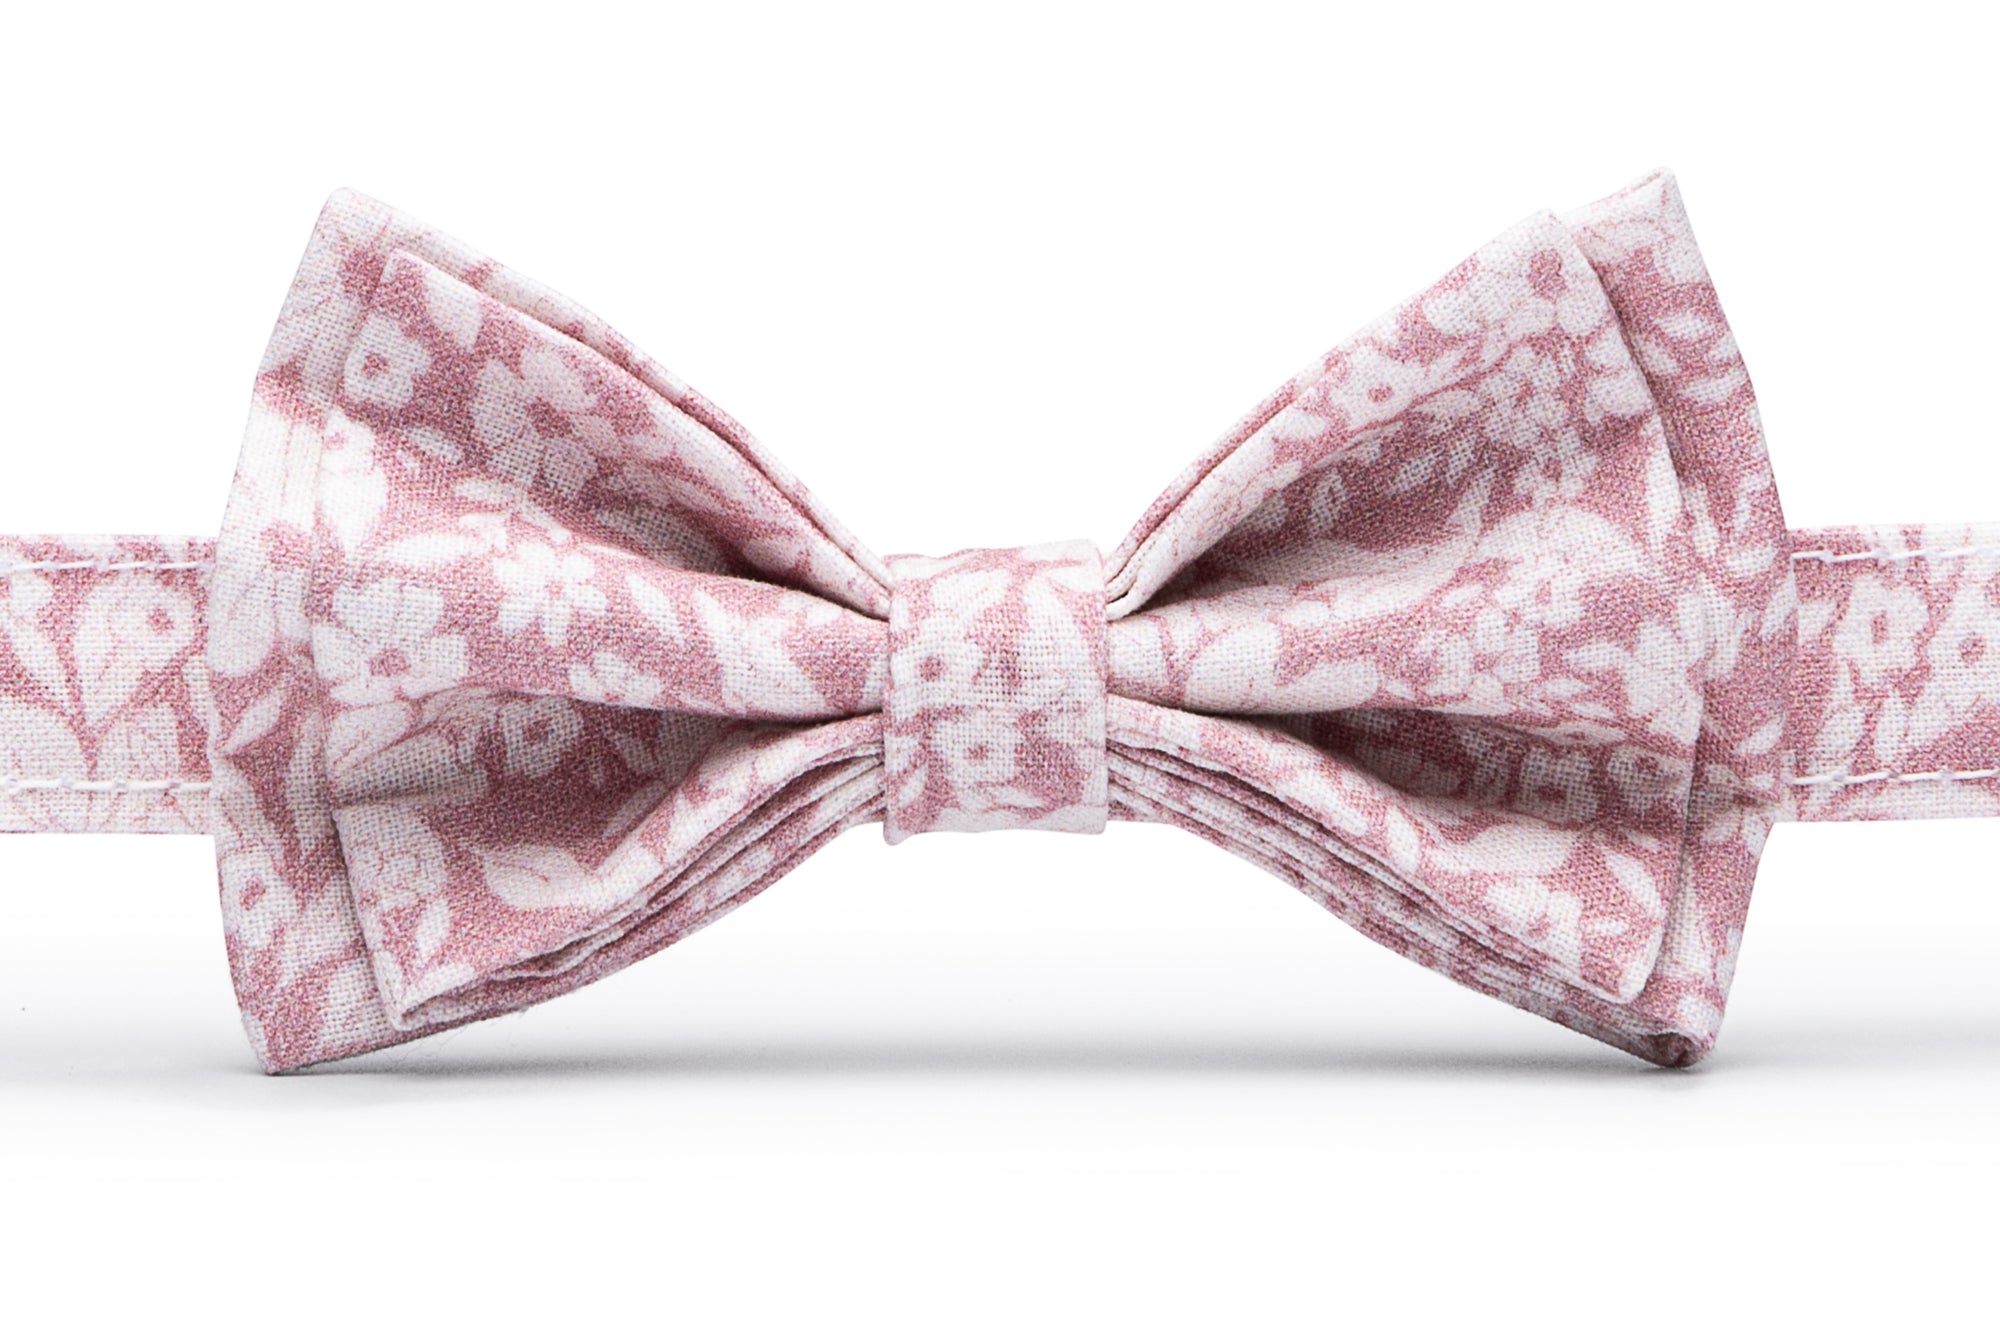 Dusty rose floral bow tie